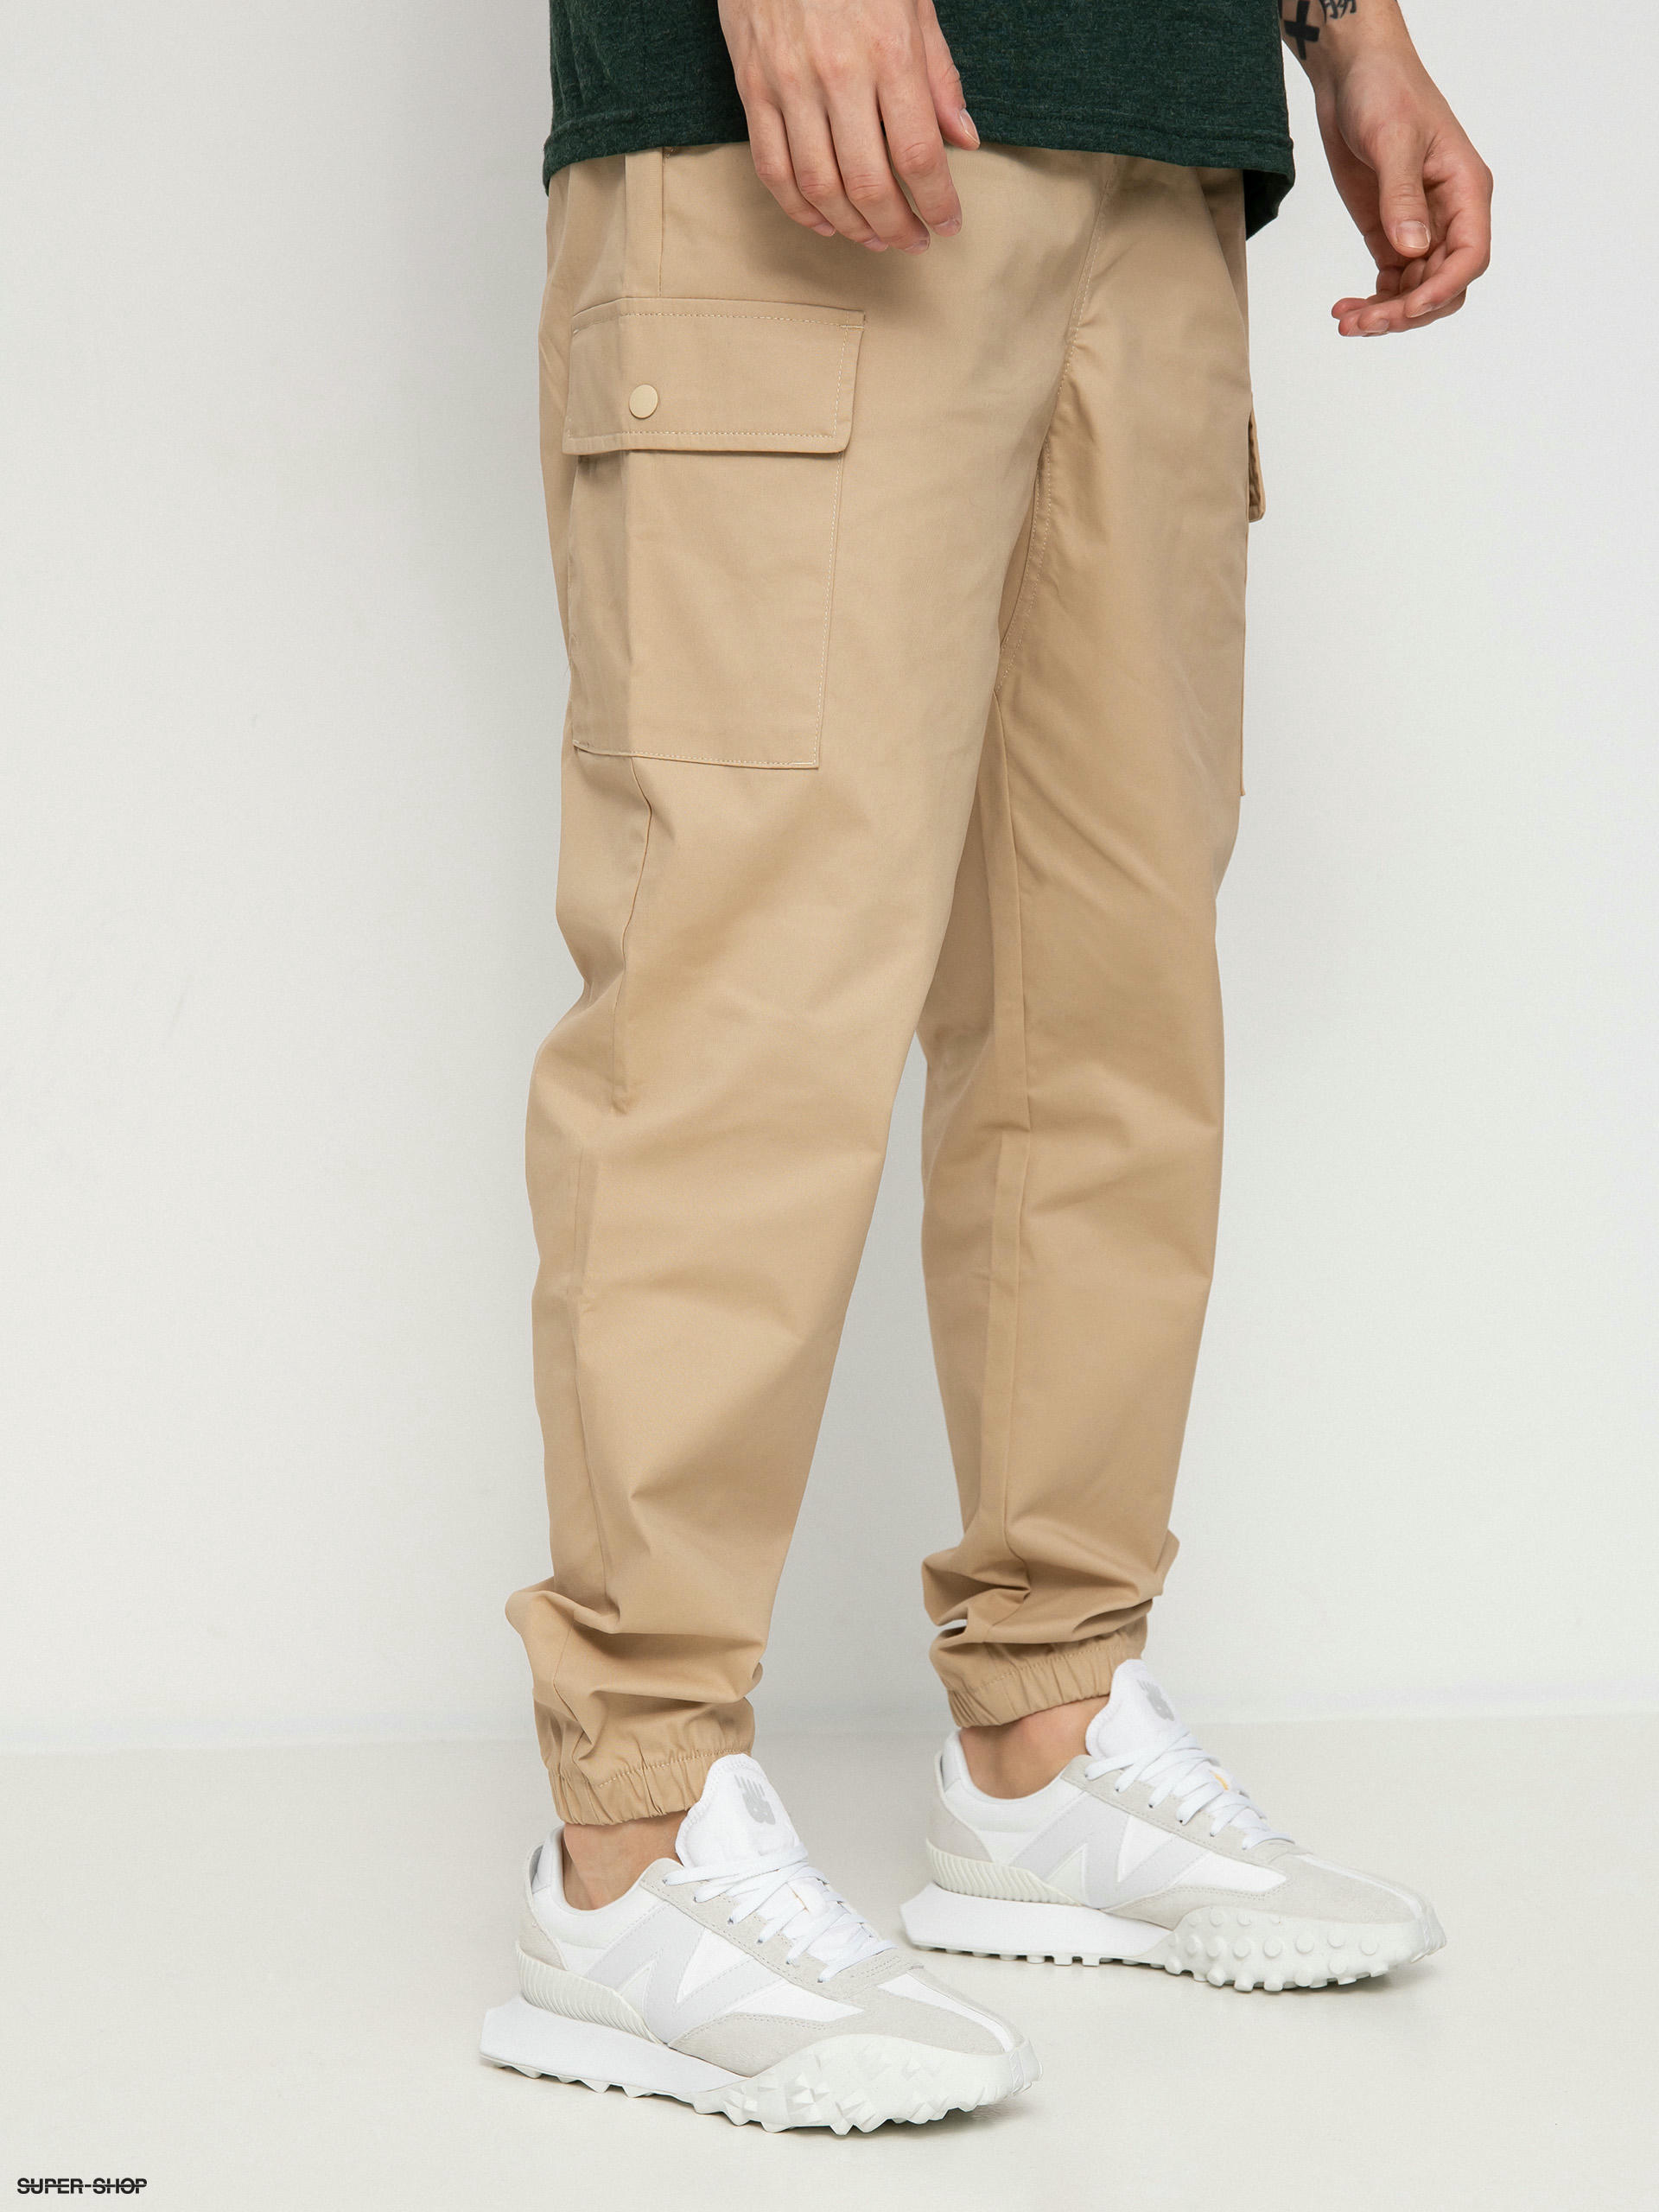 New Balance Athletics Woven Cargo Trousers In Beige-Neutral for Men